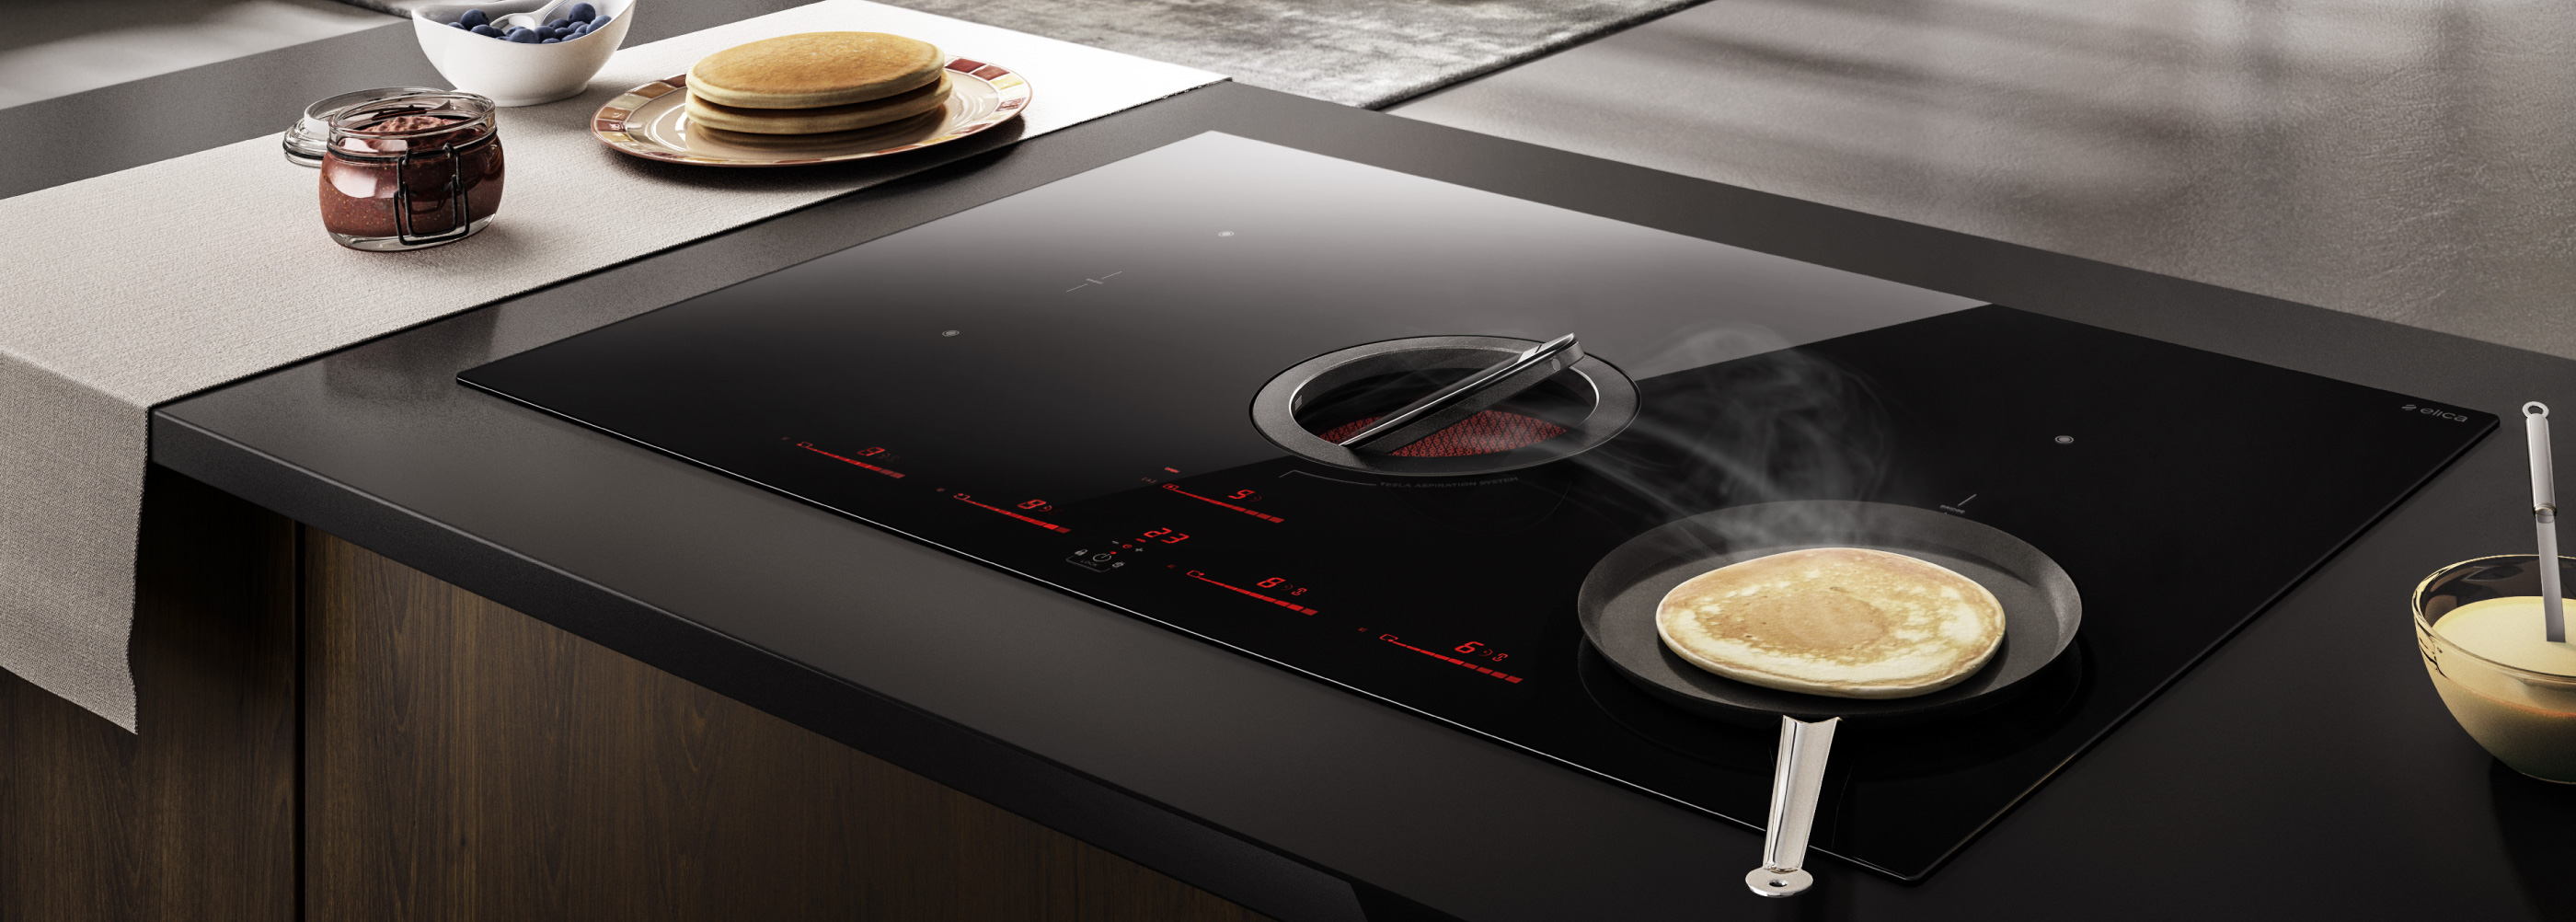 Create an unforgettable thanksgiving dinner with these recipes using an induction cooktop